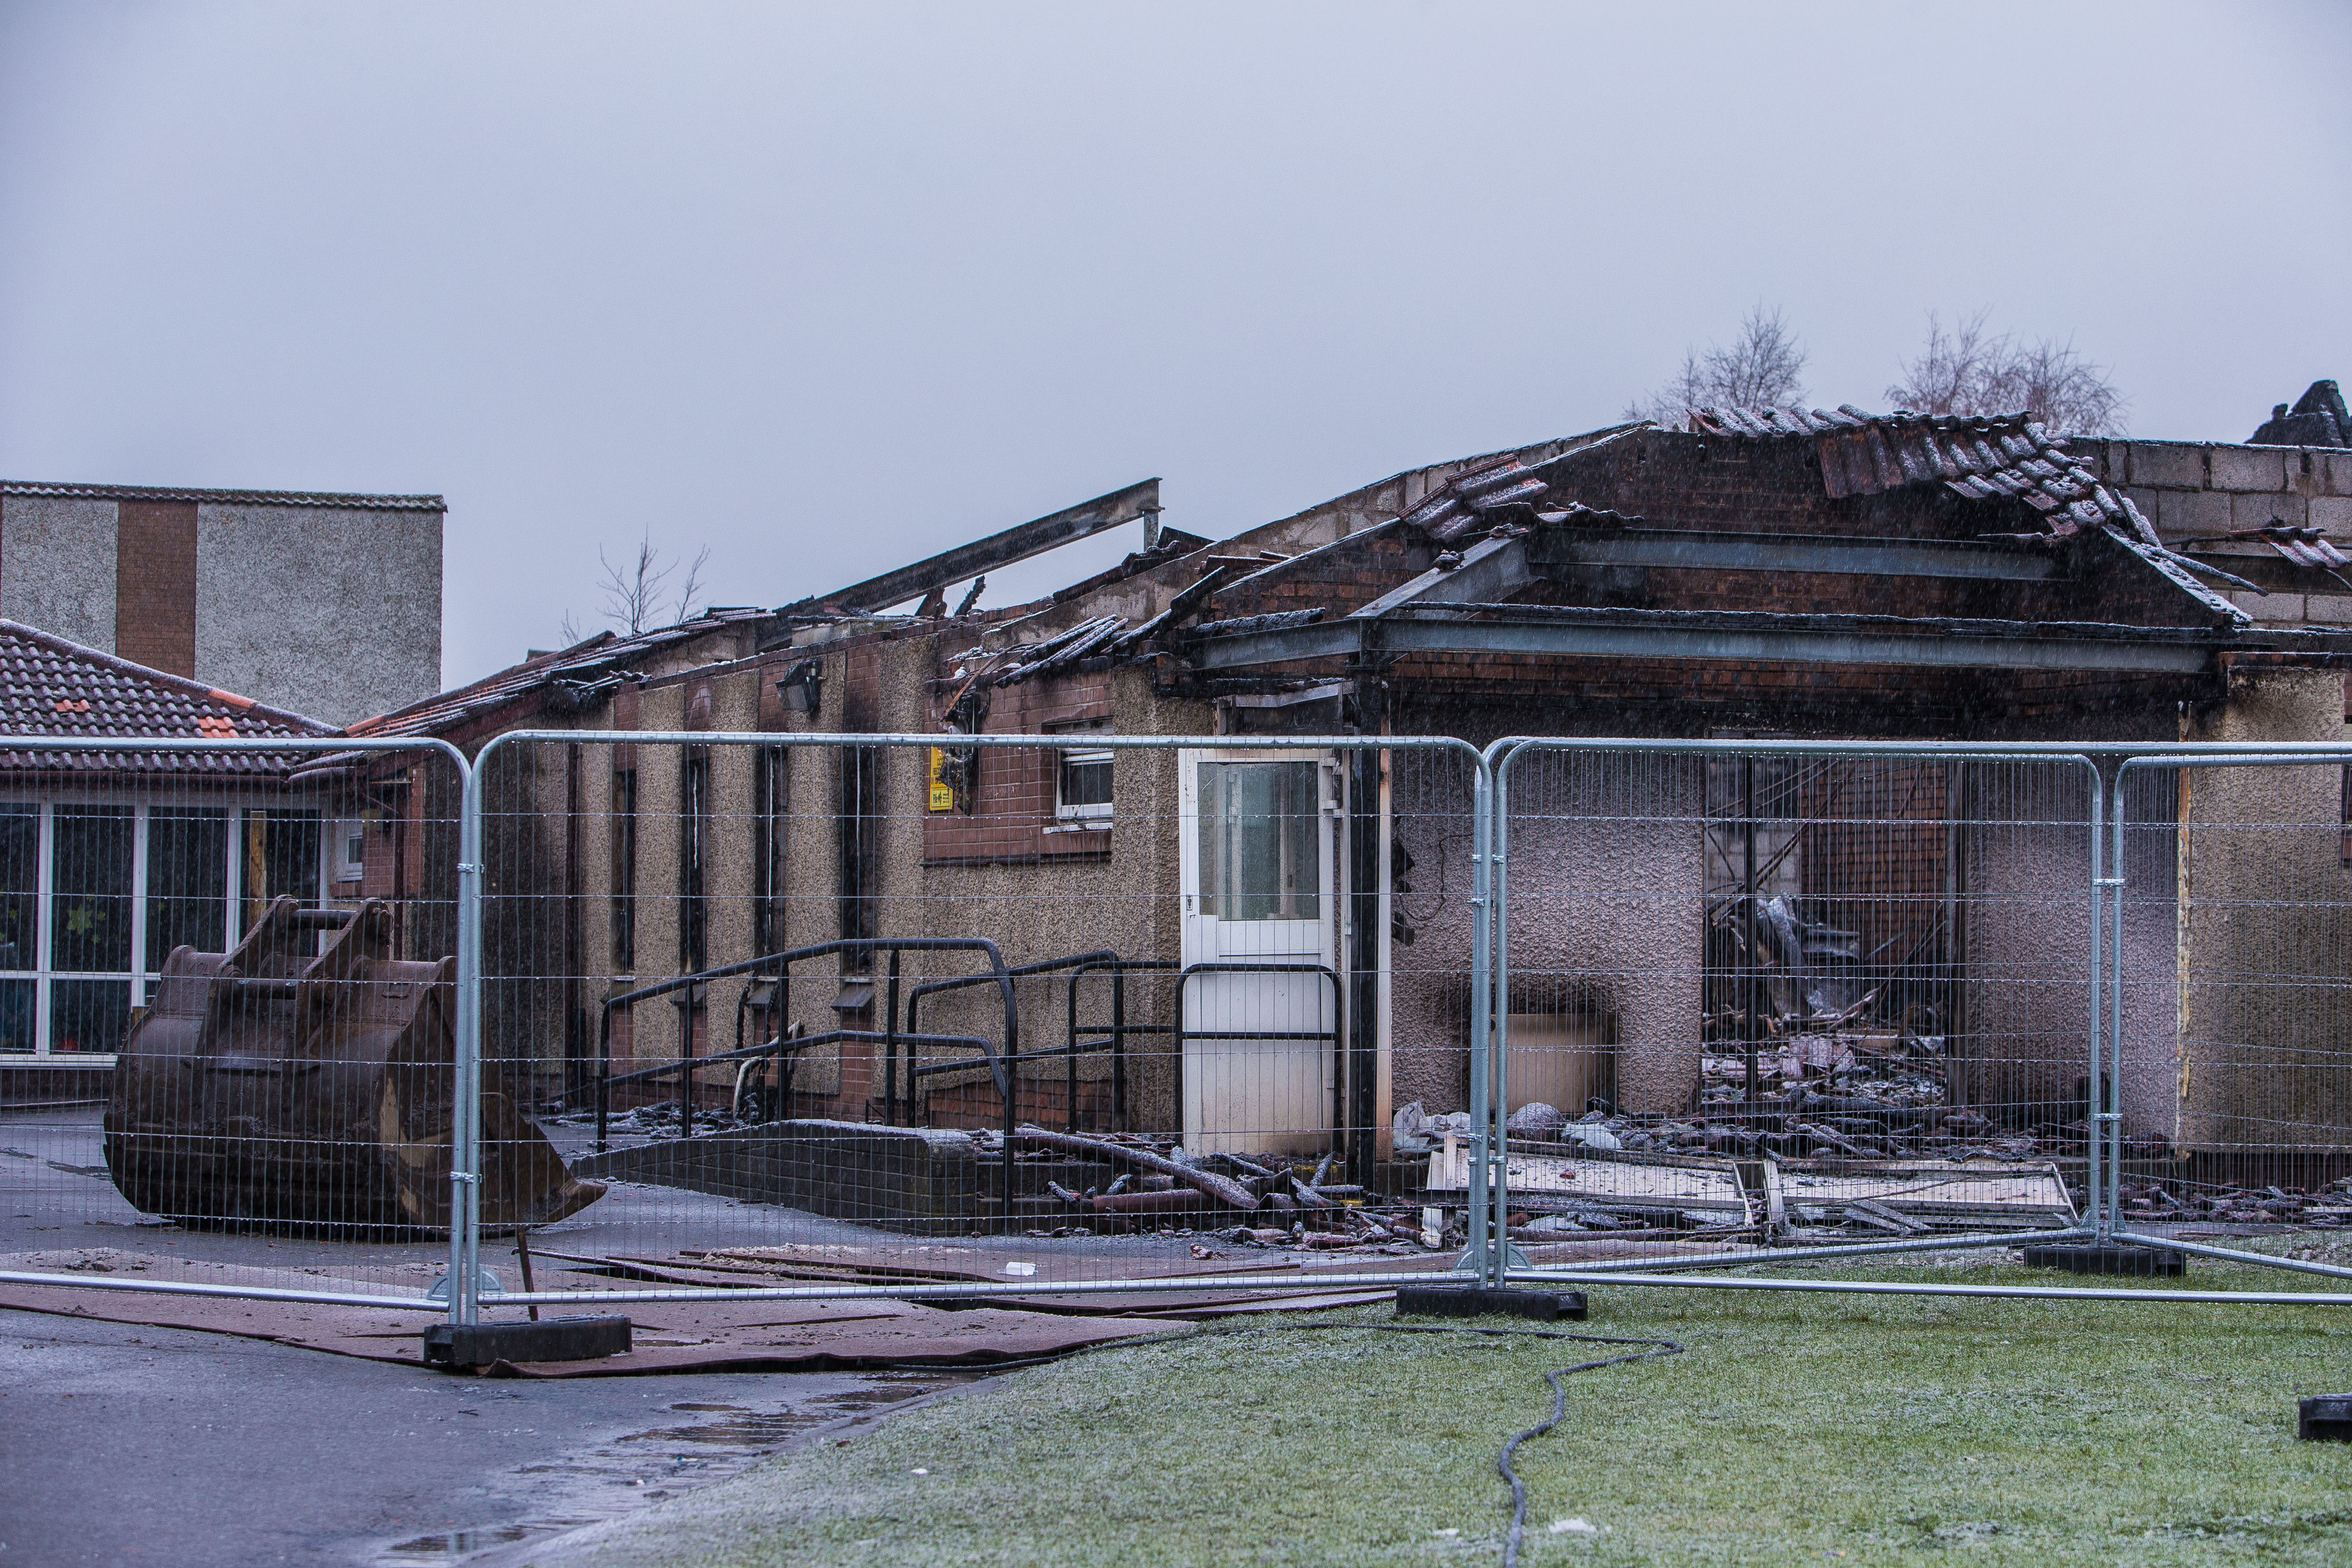 The school's junior section was destroyed in the fire.